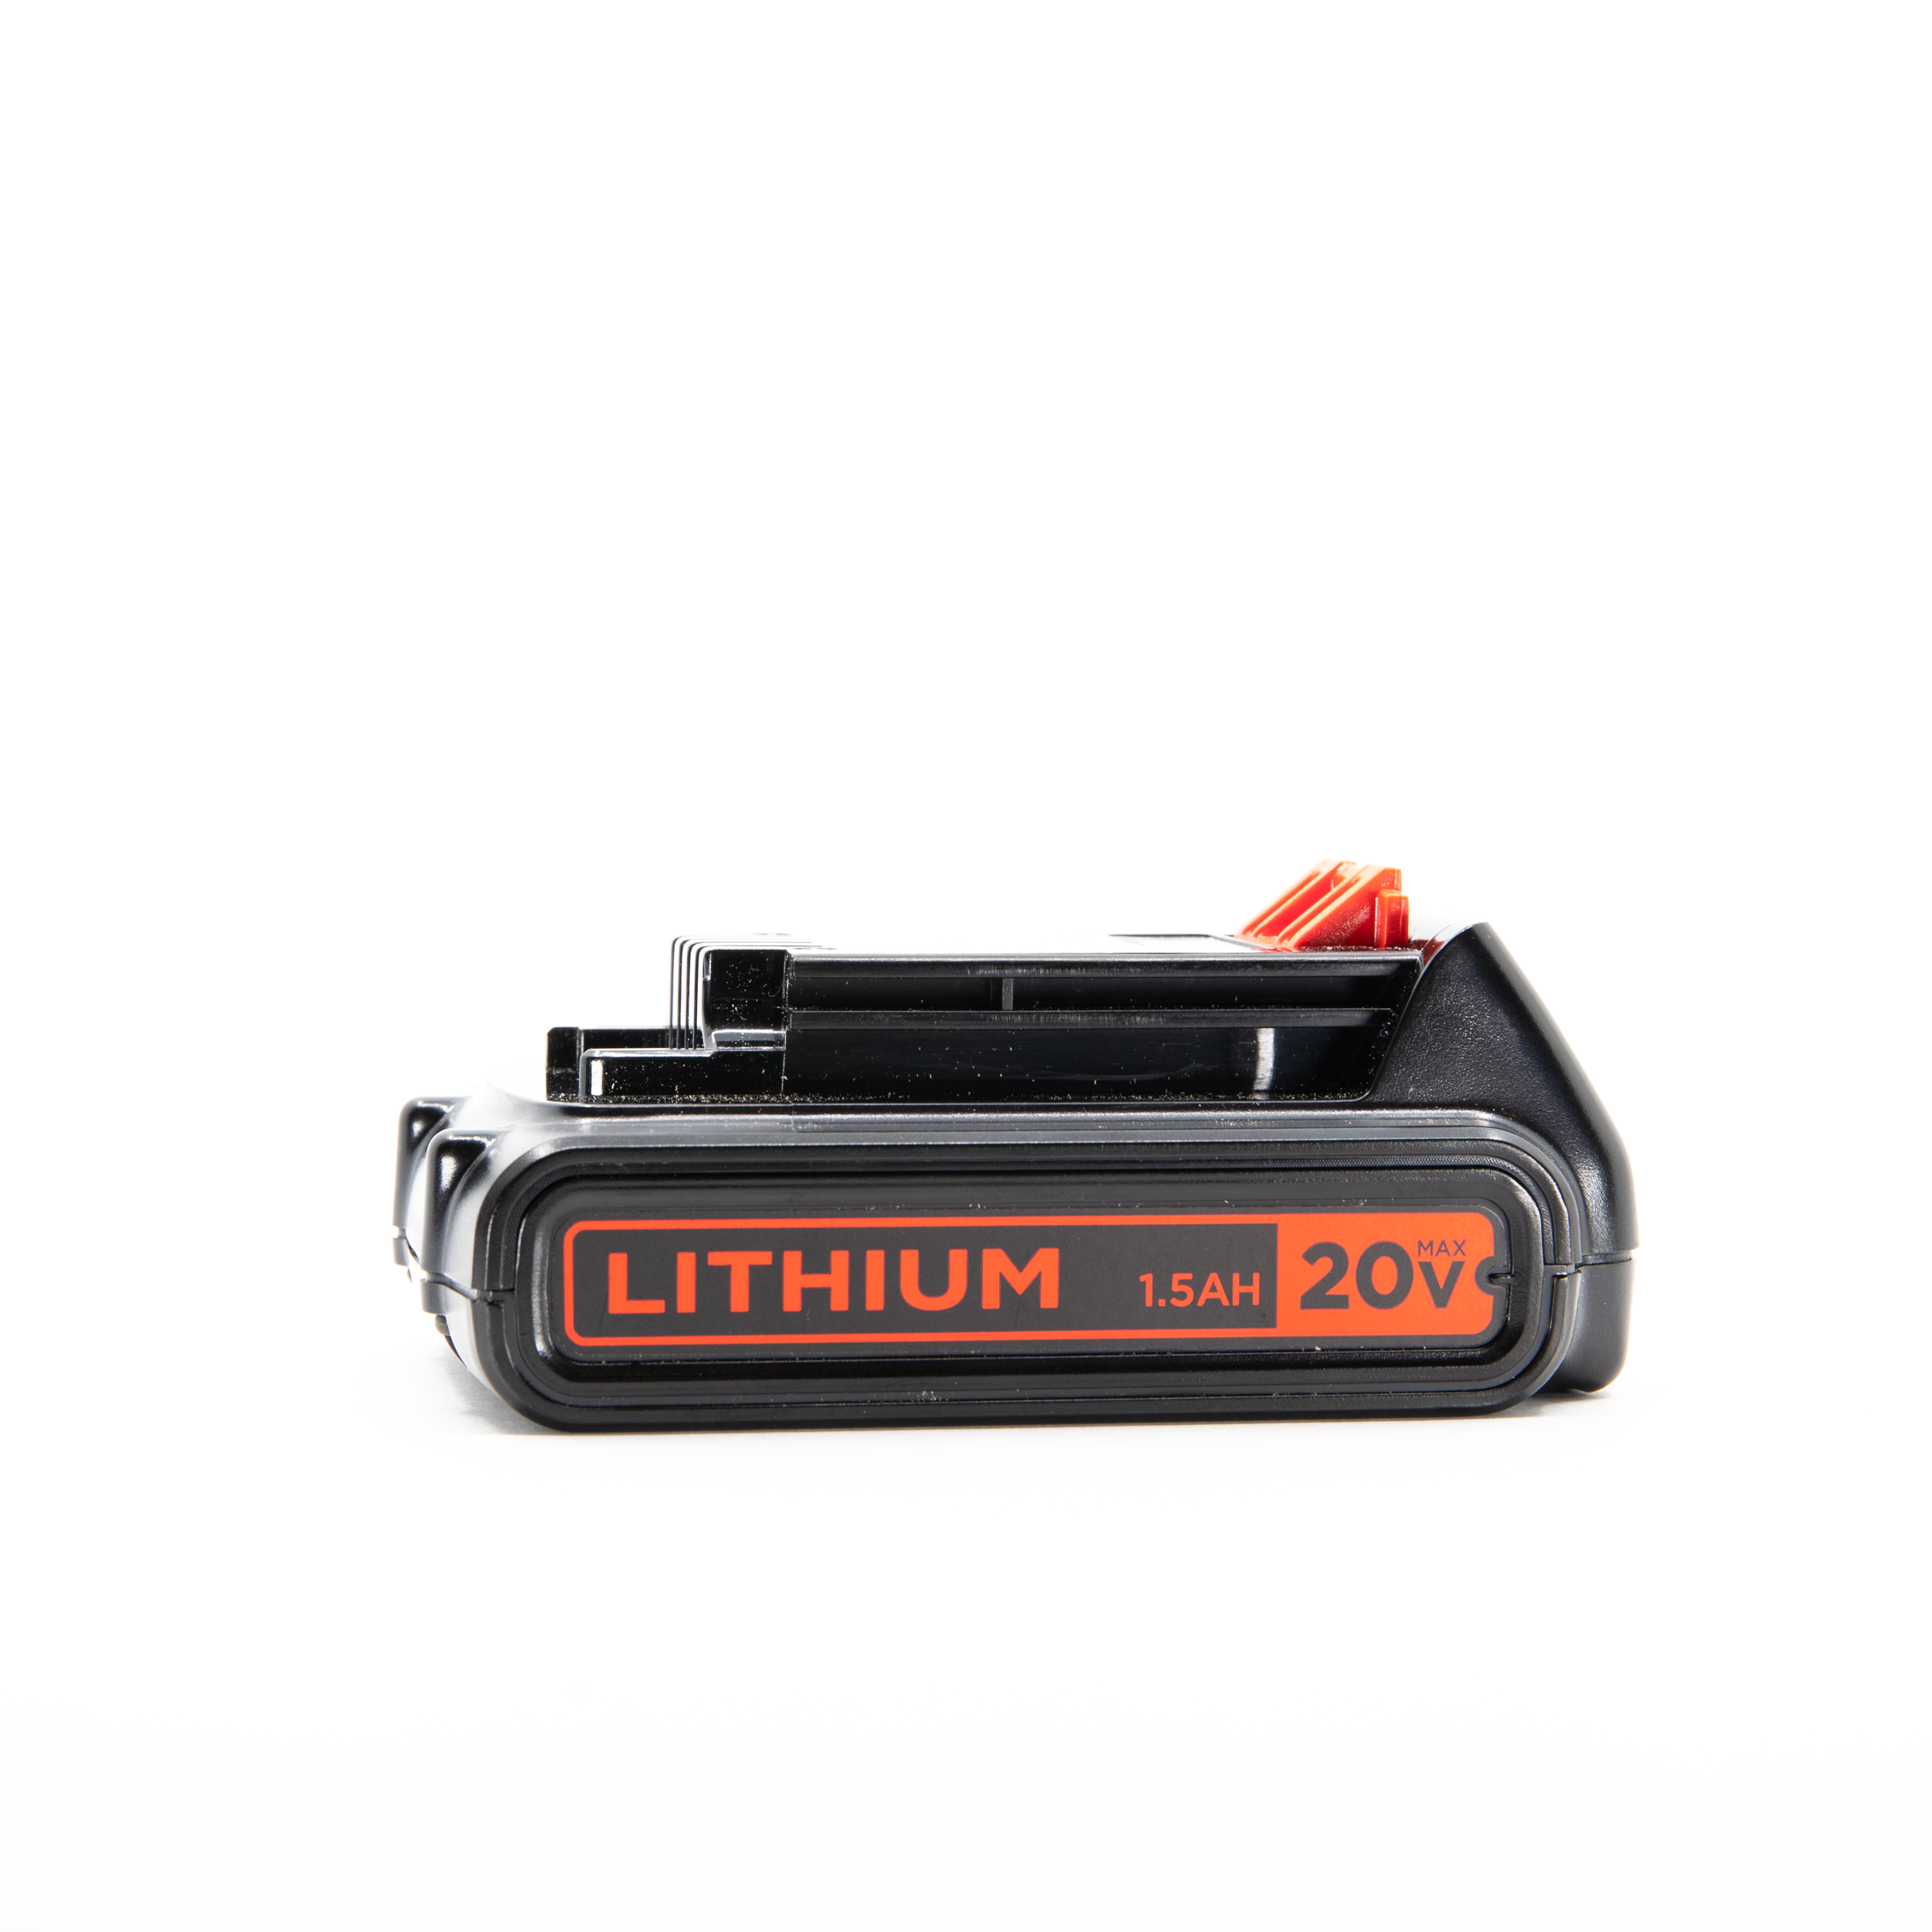 20V Max* Powerconnect 1.5Ah Lithium Ion Battery